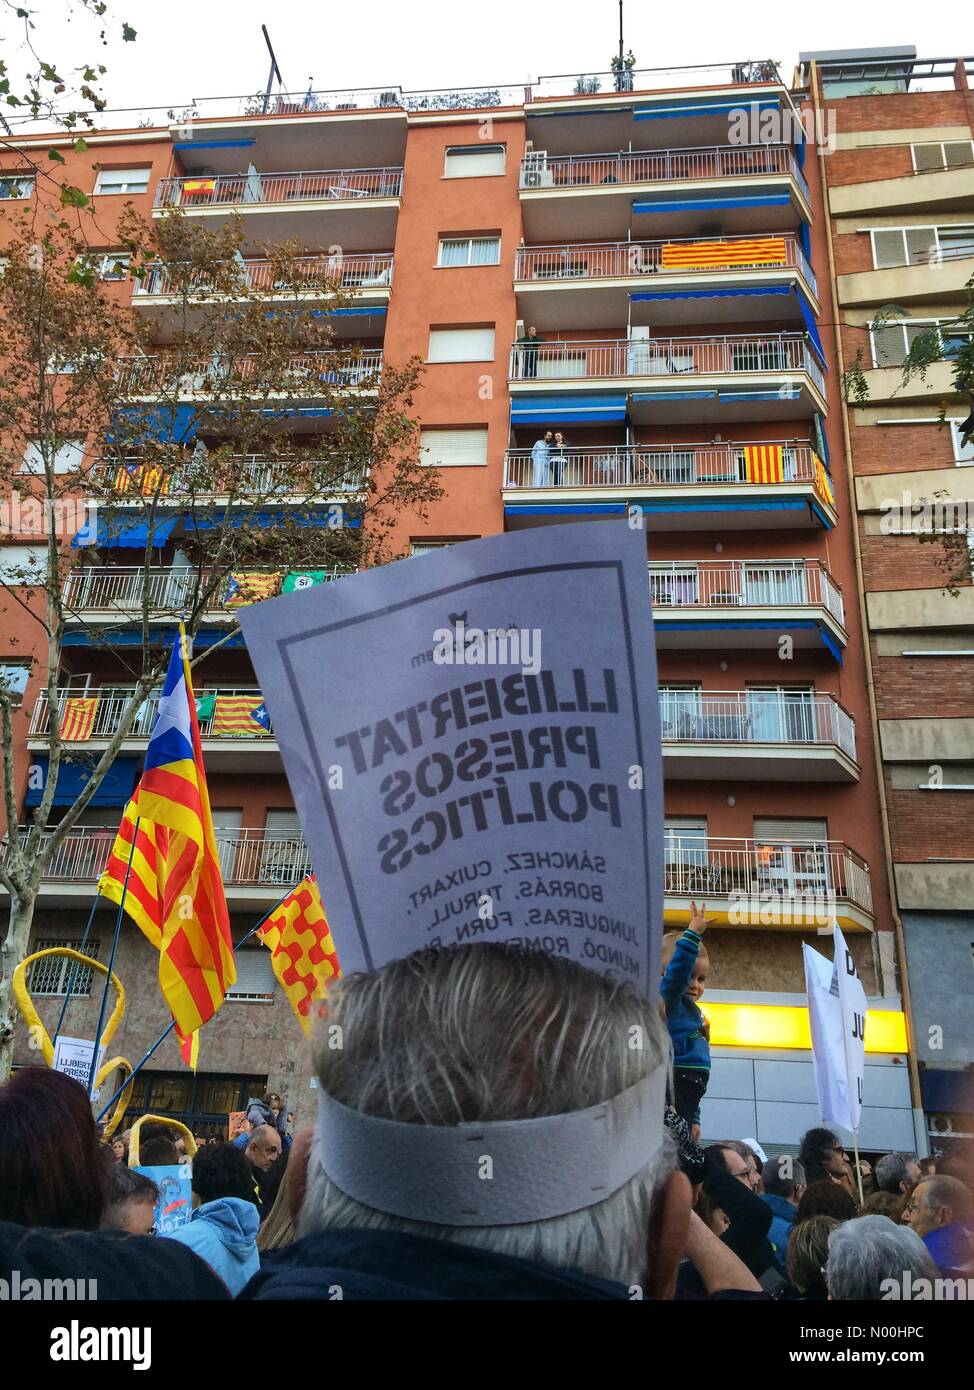 7, Barcelona, Spain. 11th Nov, 2017. Protest against the imprisonment of Catalan government members, on November 11. Credit: Queralt Sunyer/StockimoNews/Alamy Live News Stock Photo